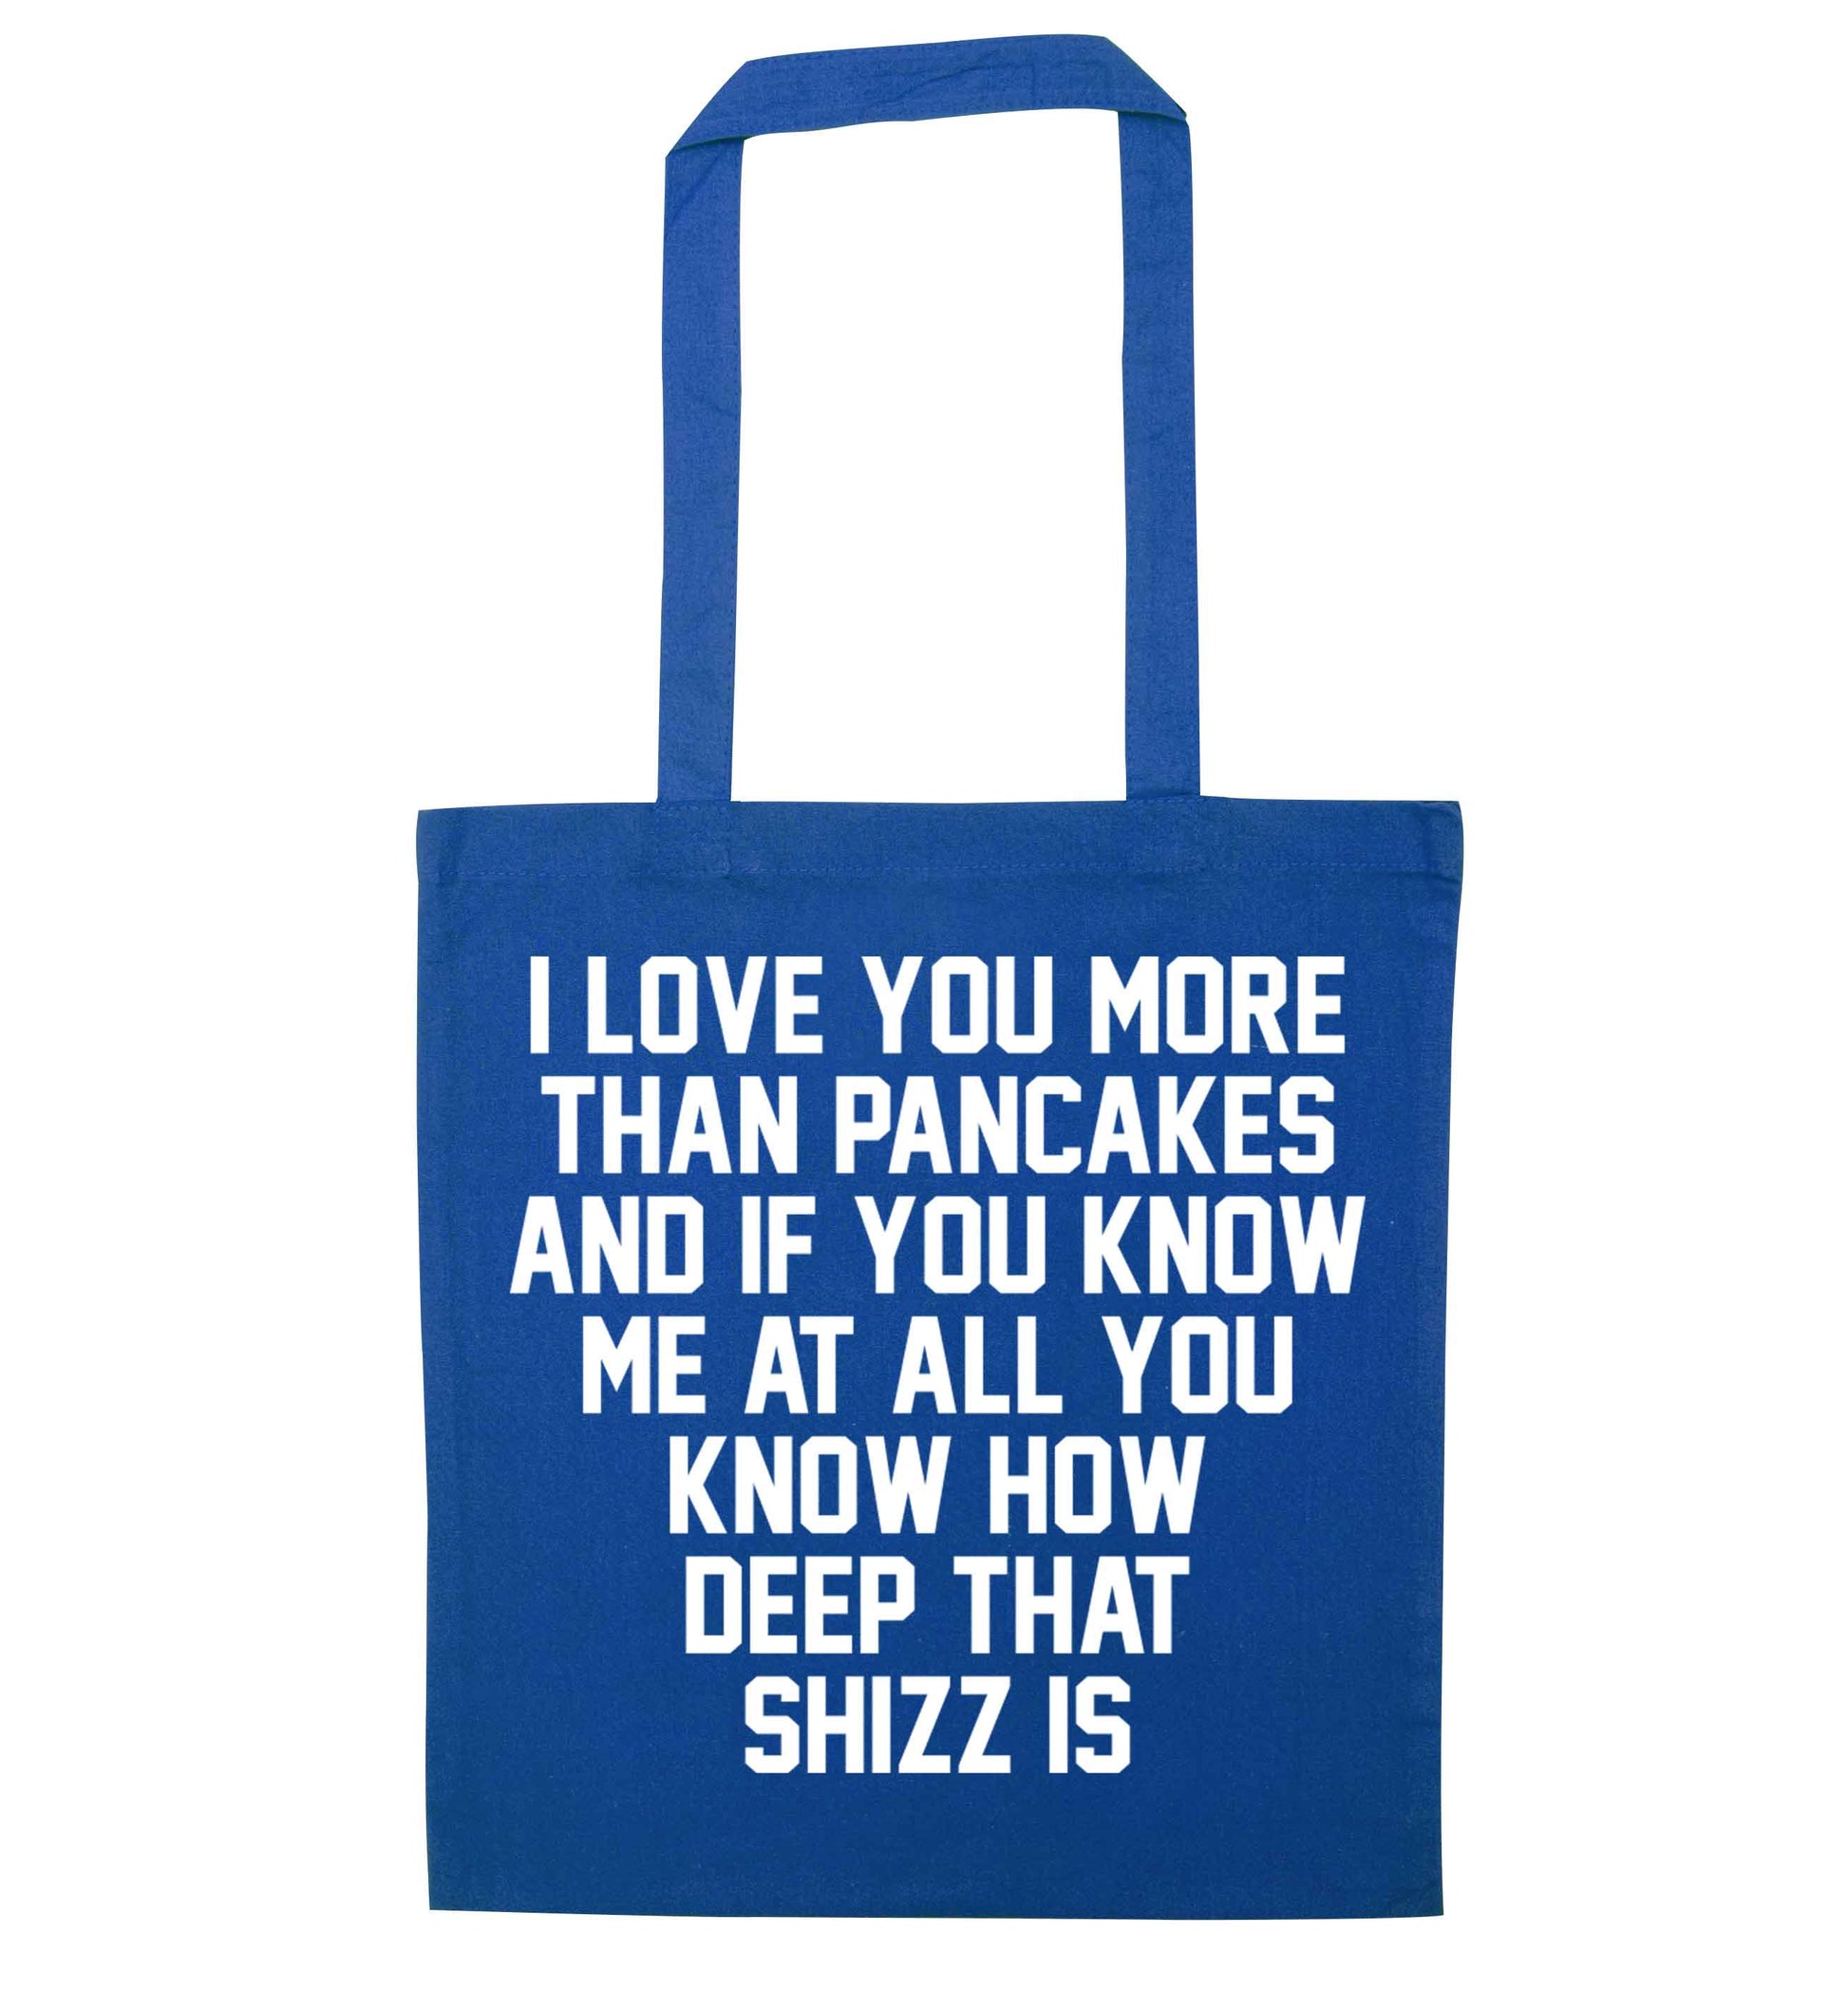 I love you more than pancakes and if you know me at all you know how deep that shizz is blue tote bag